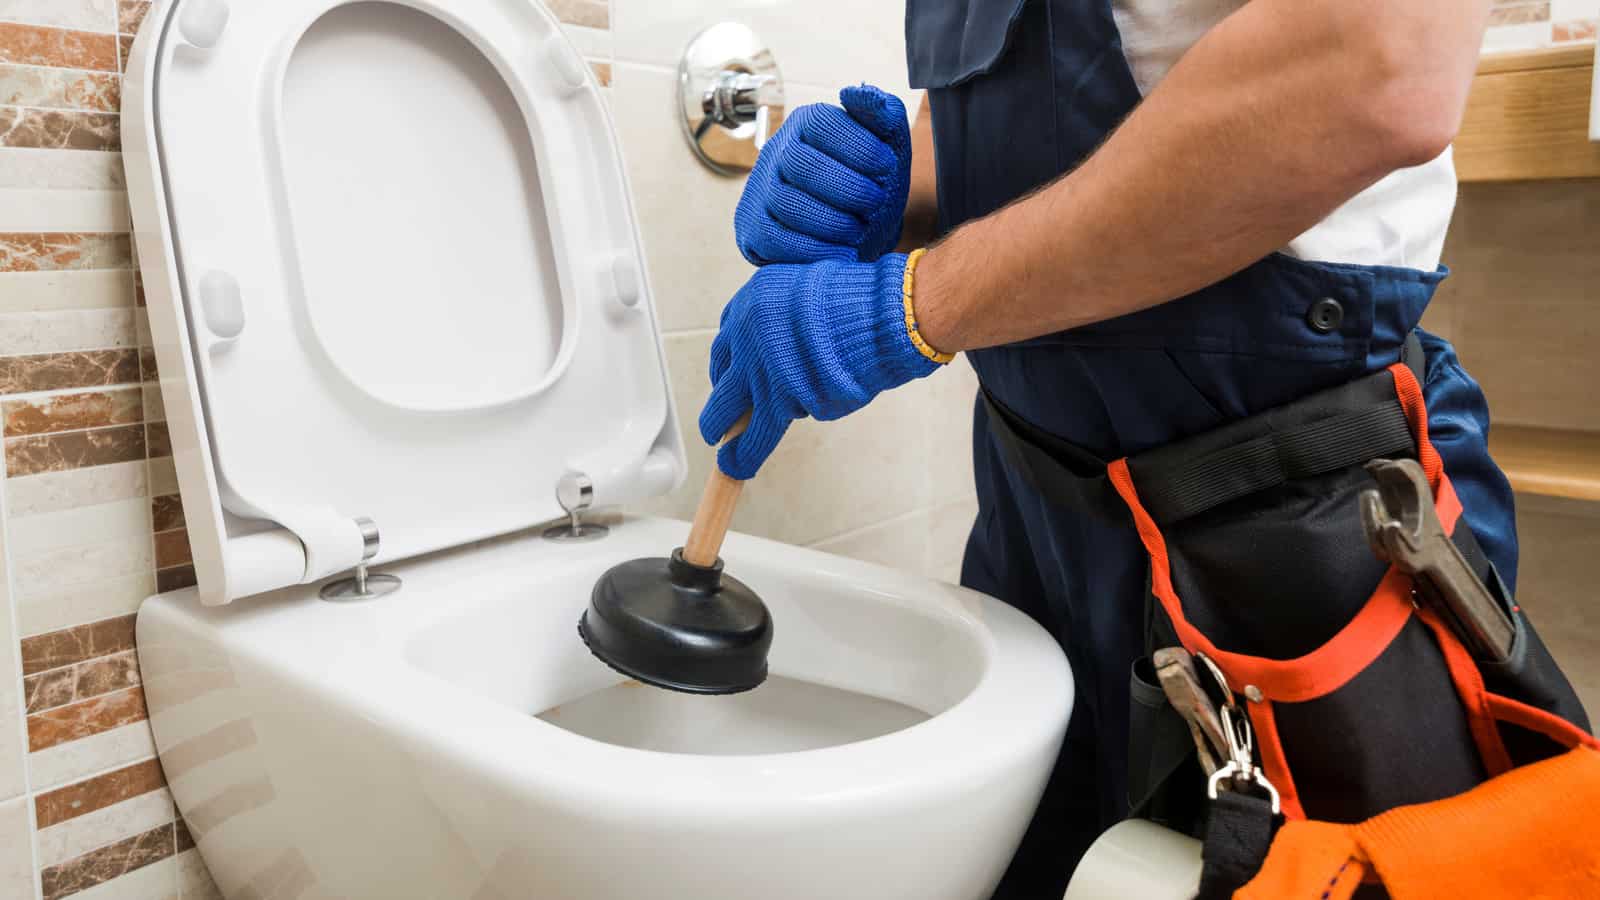 Roto Rooter Plumbing And Water Cleanup of Birmingham